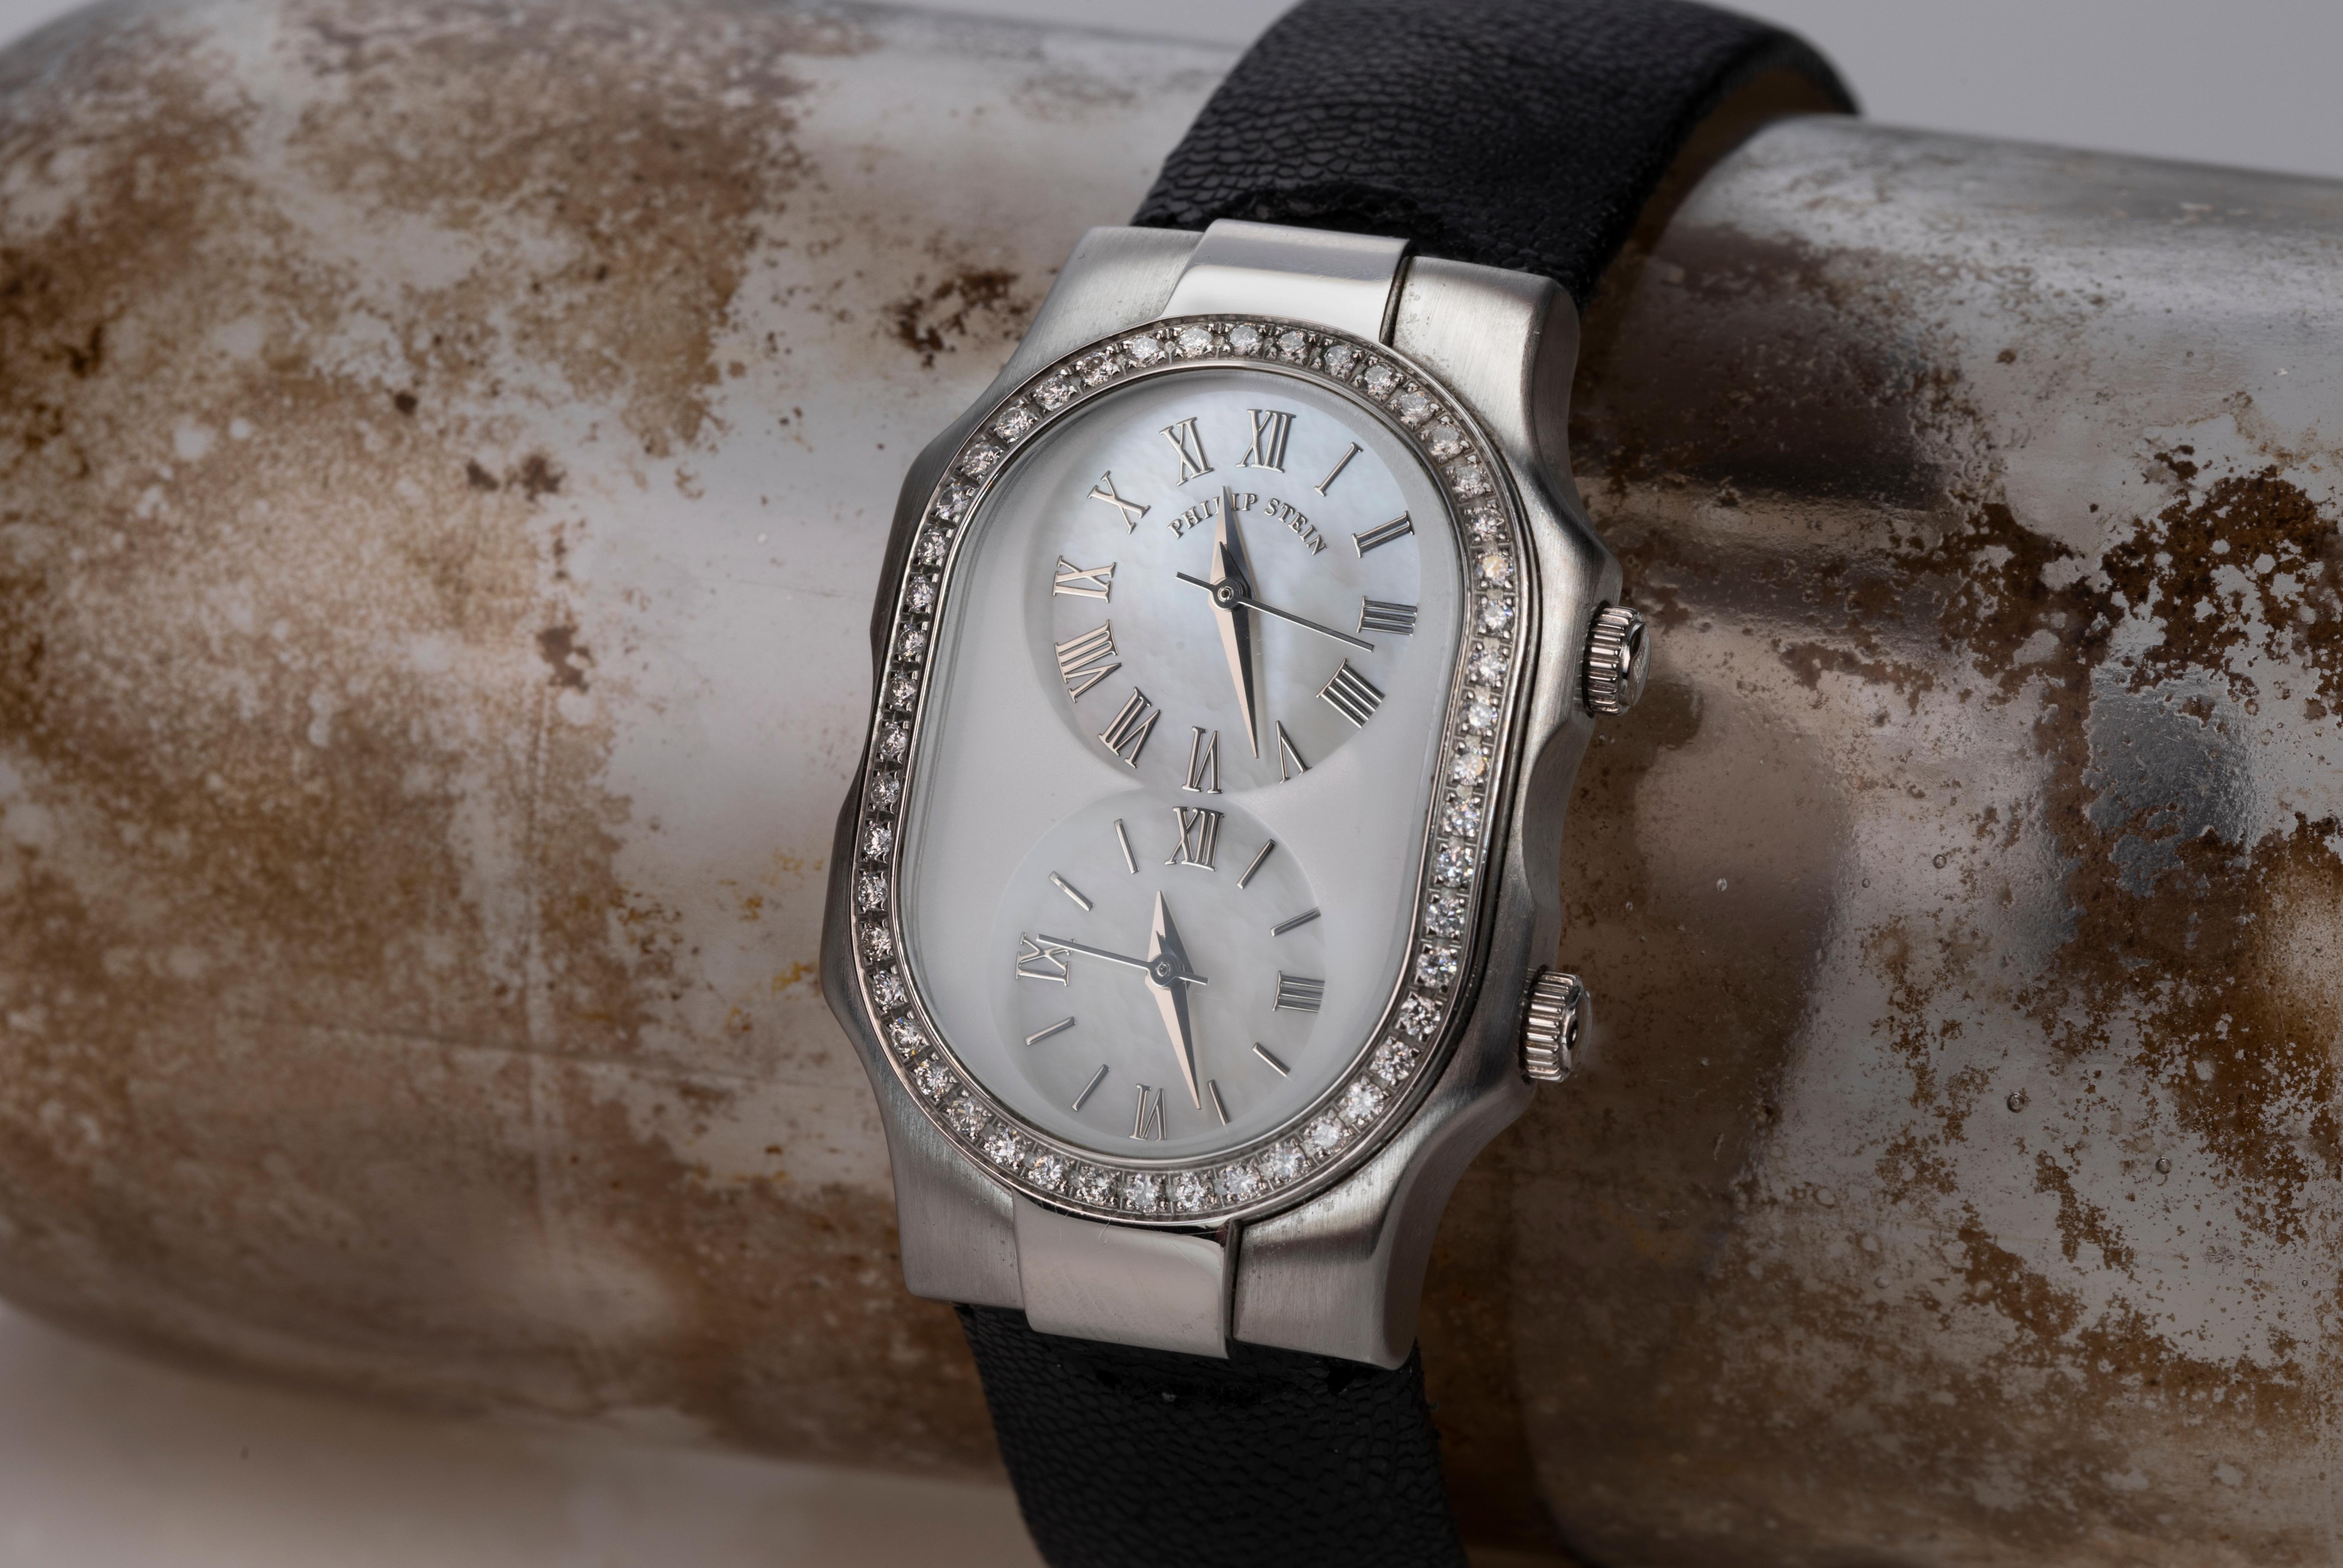 Teslar Collection
27mm x 42mm Case Dimensions
Stainless Steel
Featuring Quartz Movement with Timezone Complication
Diamond Bezel
Mother of Pearl Dial
Tang Buckle

Comes with additional white strap.

The latest study on the benefits of our Natural